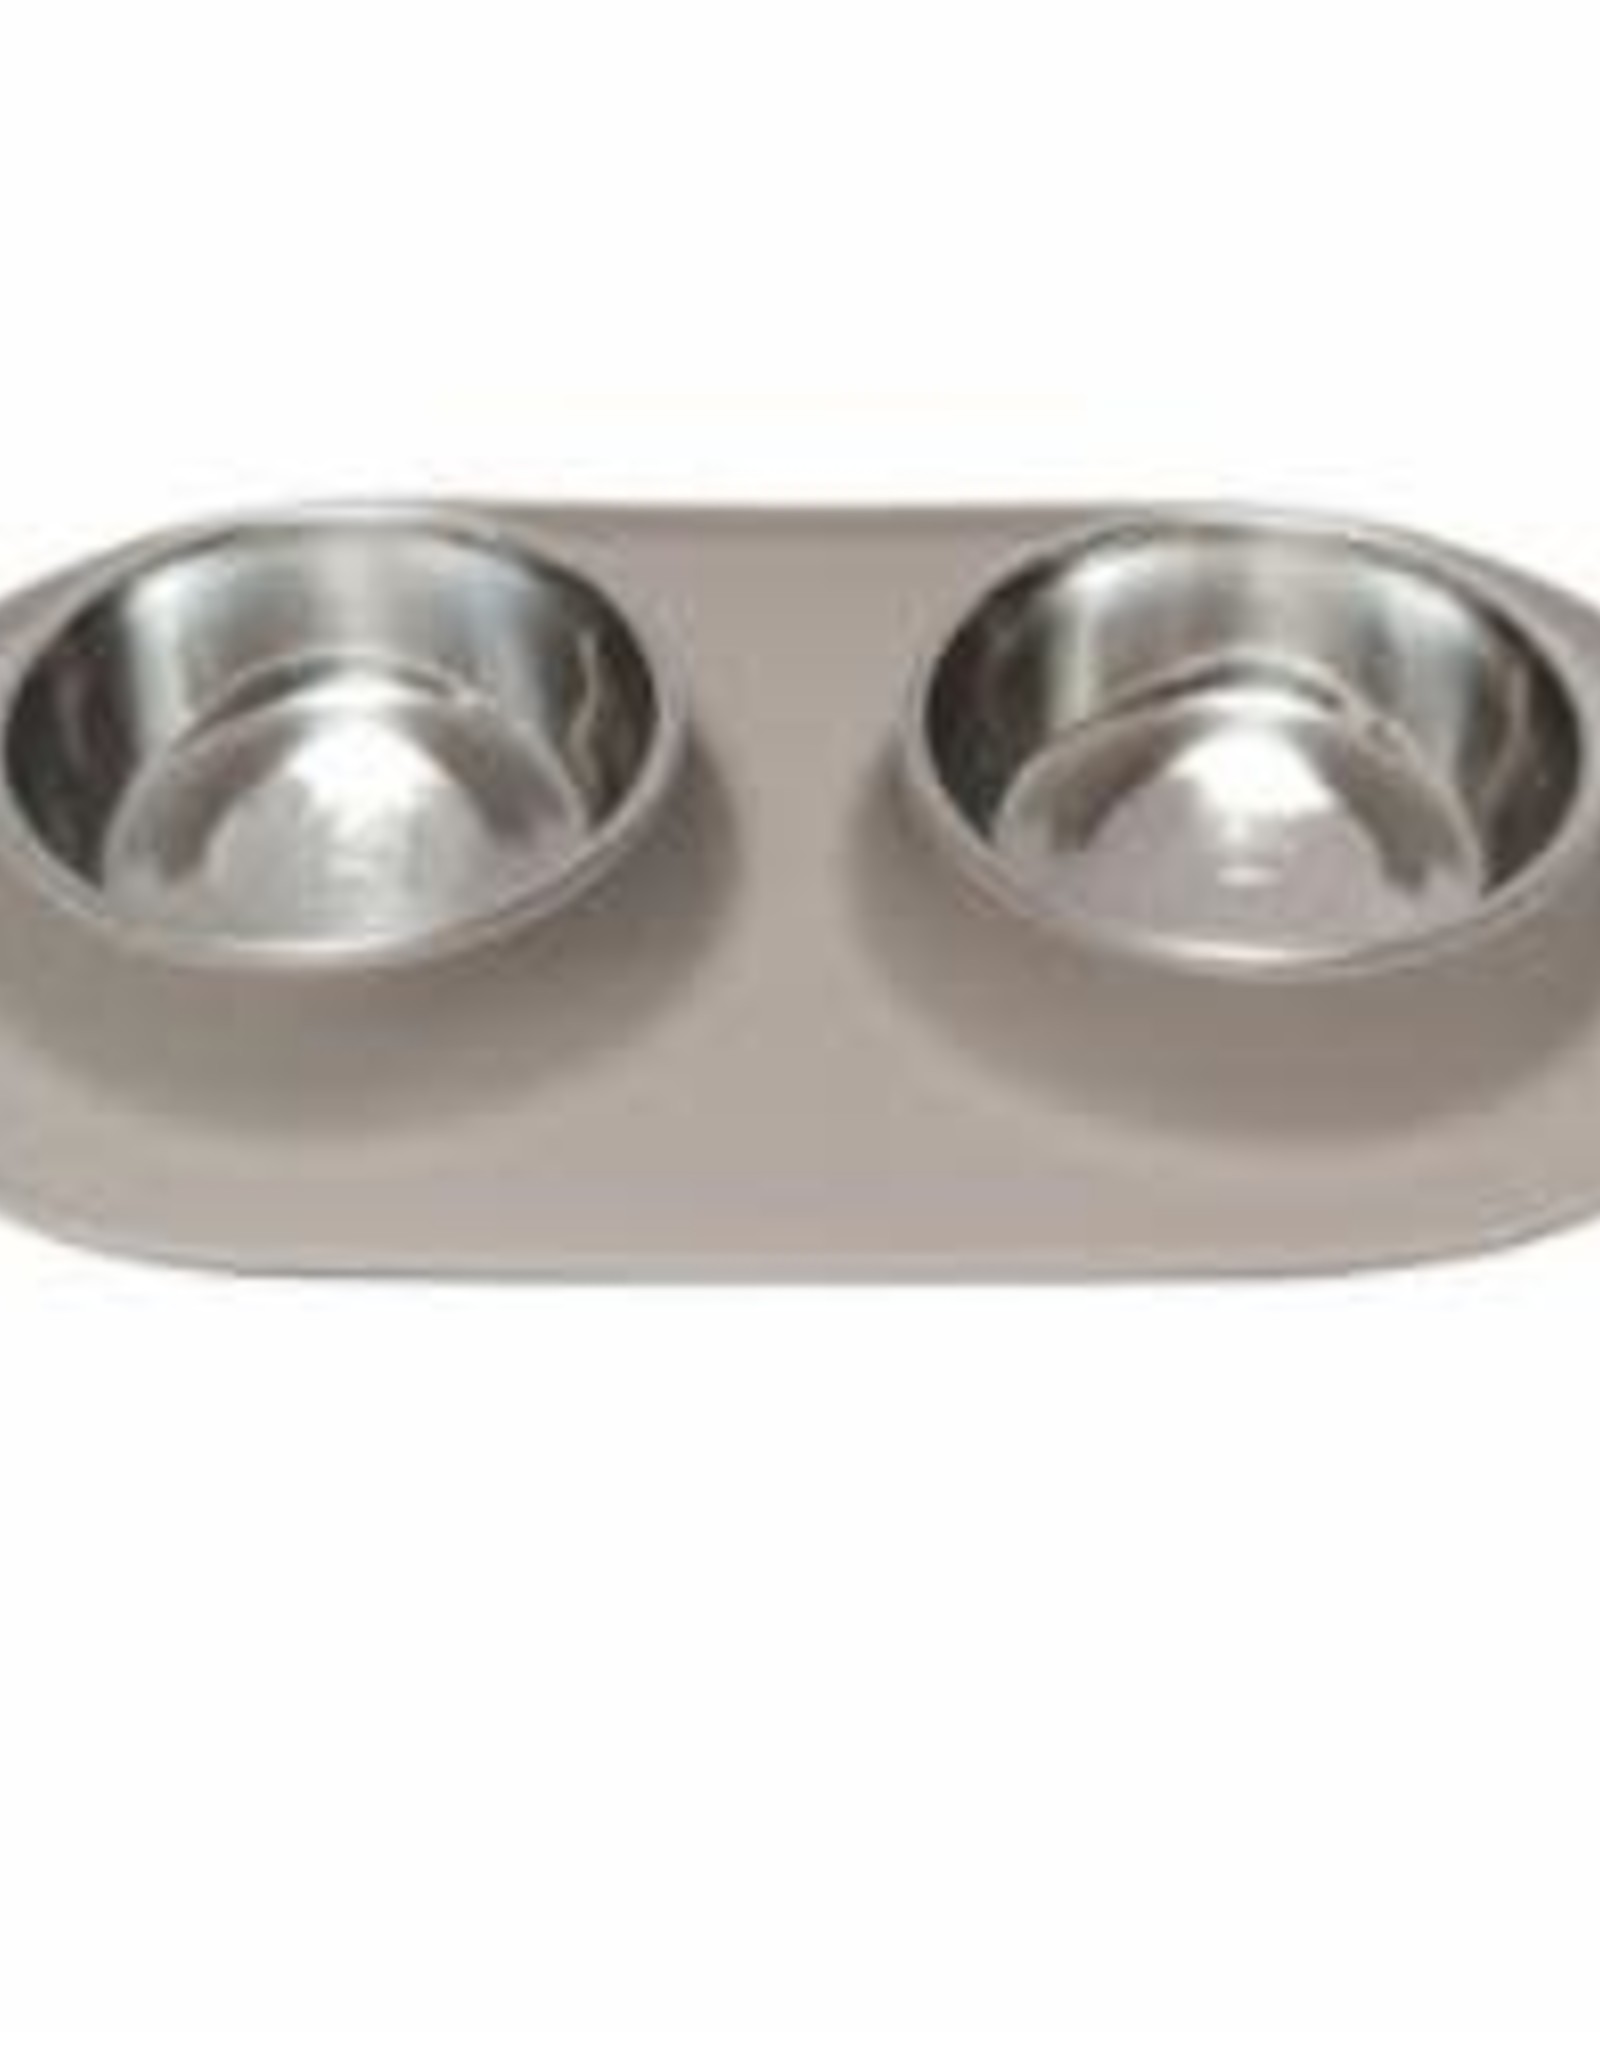 Messy Mutts Messy Mutts Feeder Silicone with SS Bowls Double Diner Medium Grey 1.5 Cup